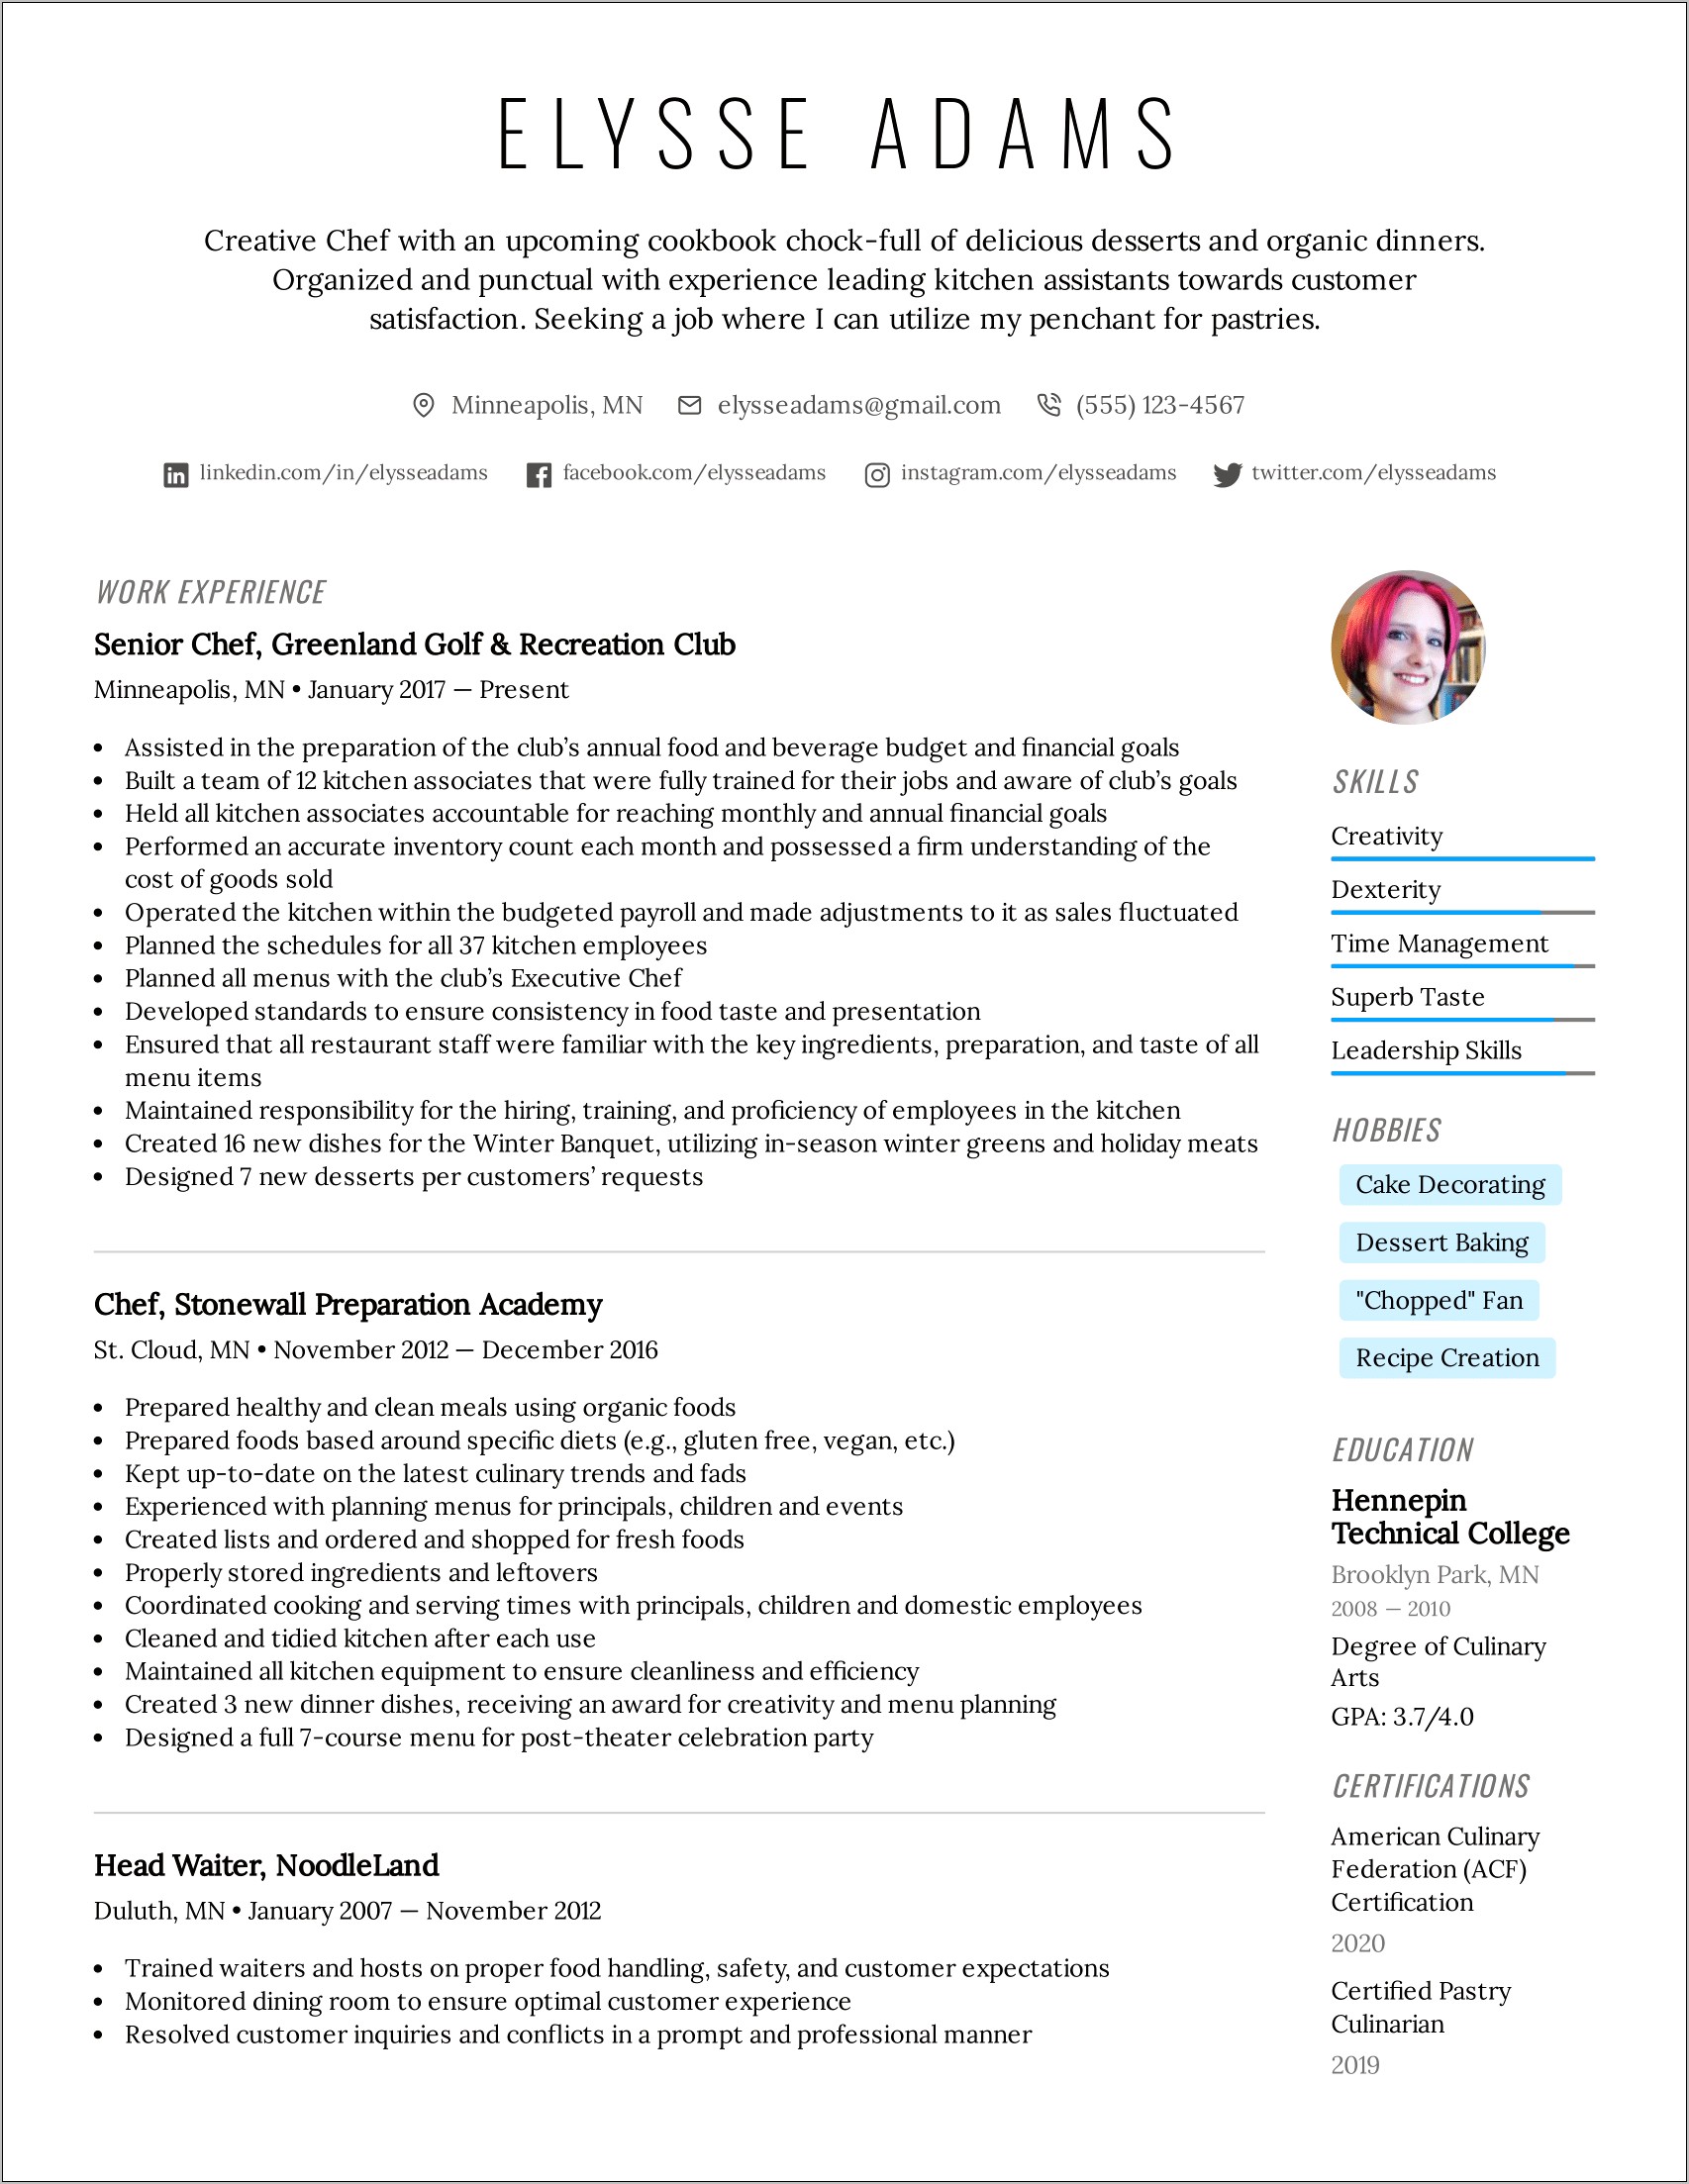 Skills And Experience Based Resumes With No Dates